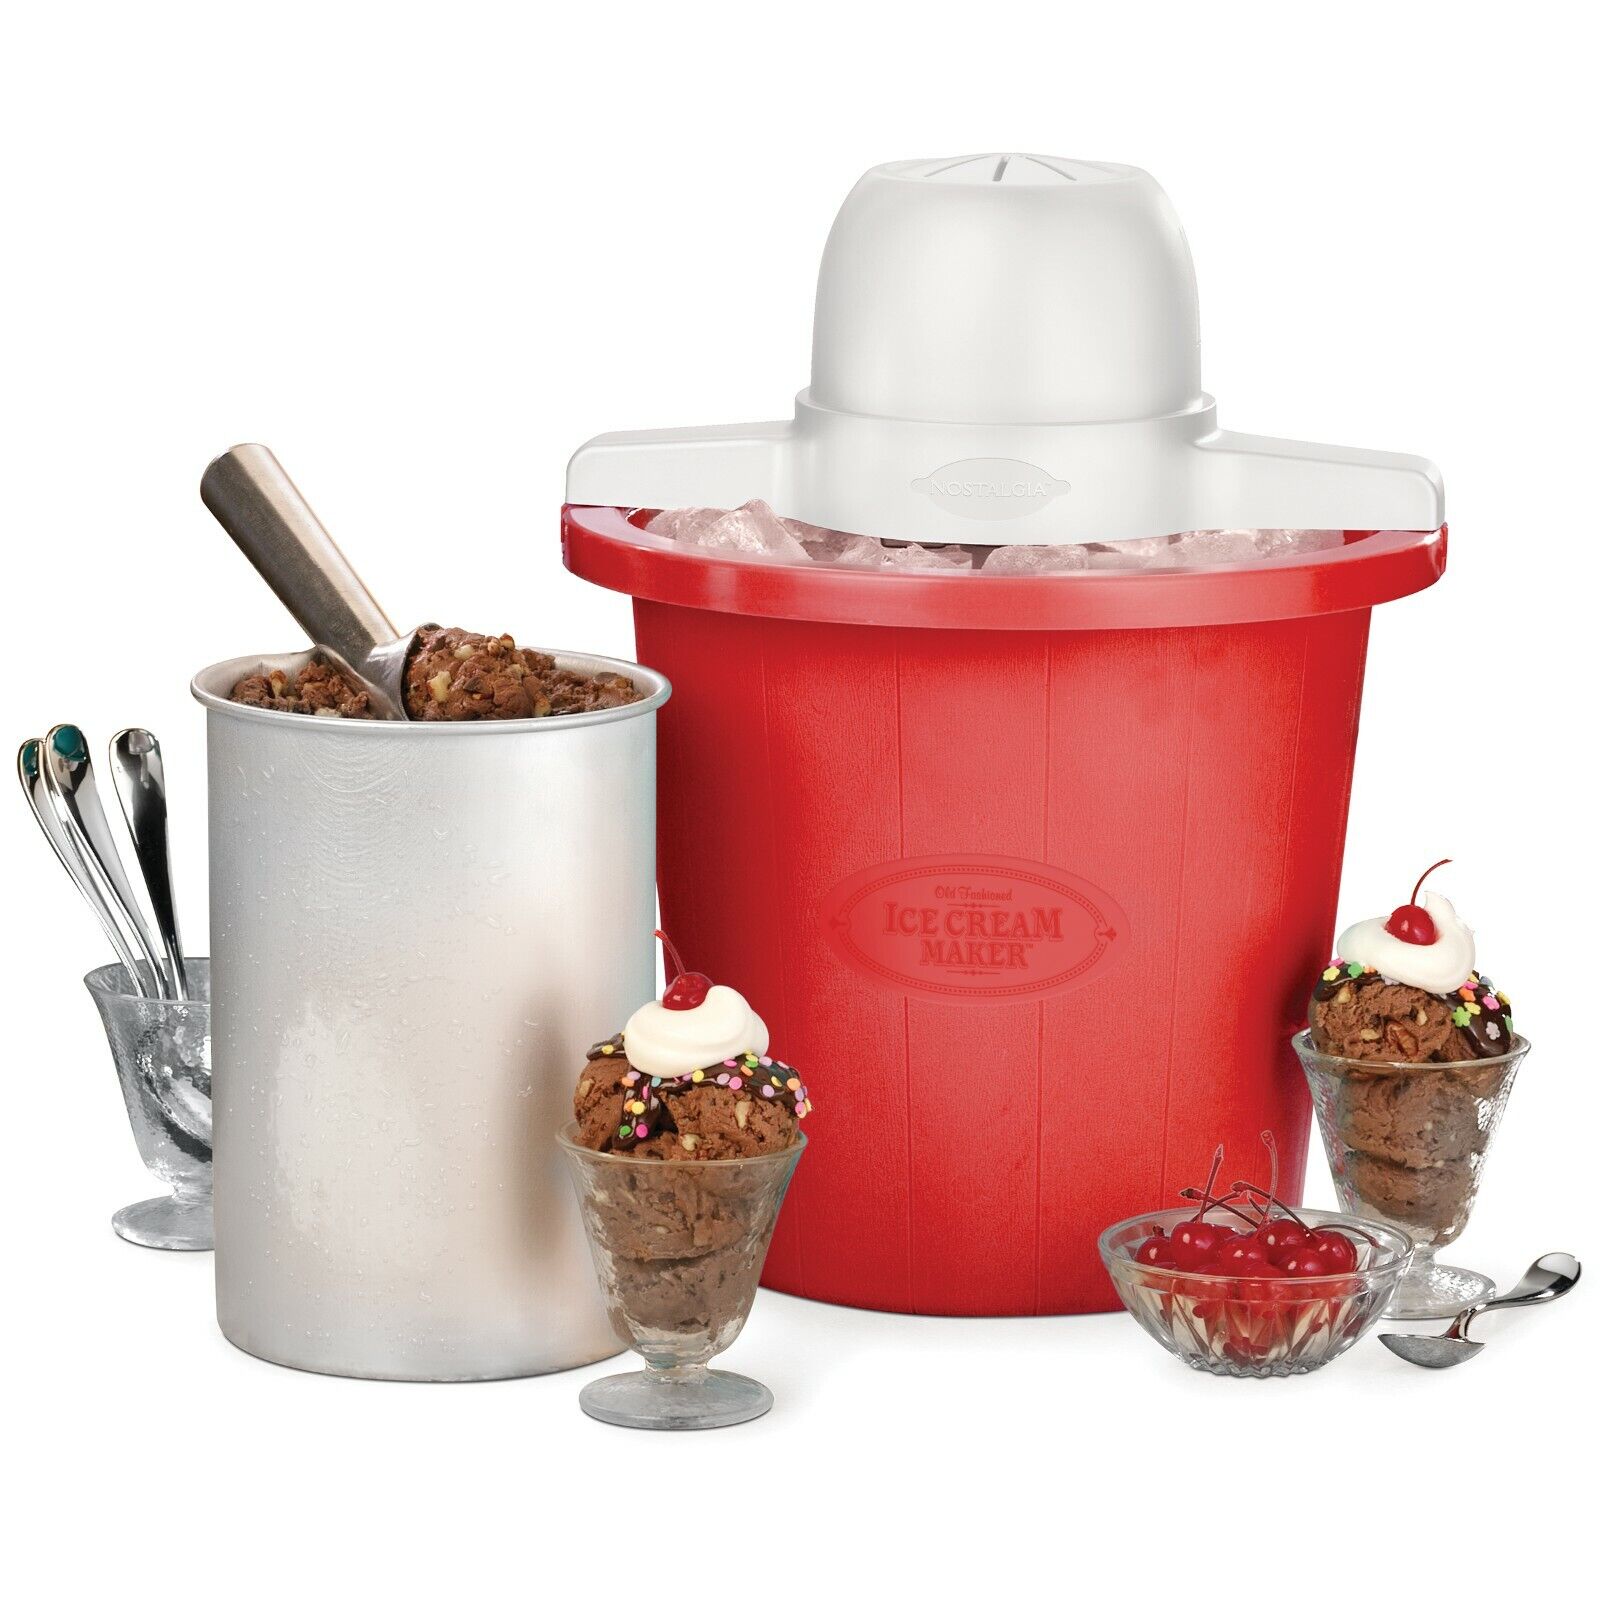 what-all-is-needed-to-make-ice-cream-with-a-4-qt-ice-cream-maker